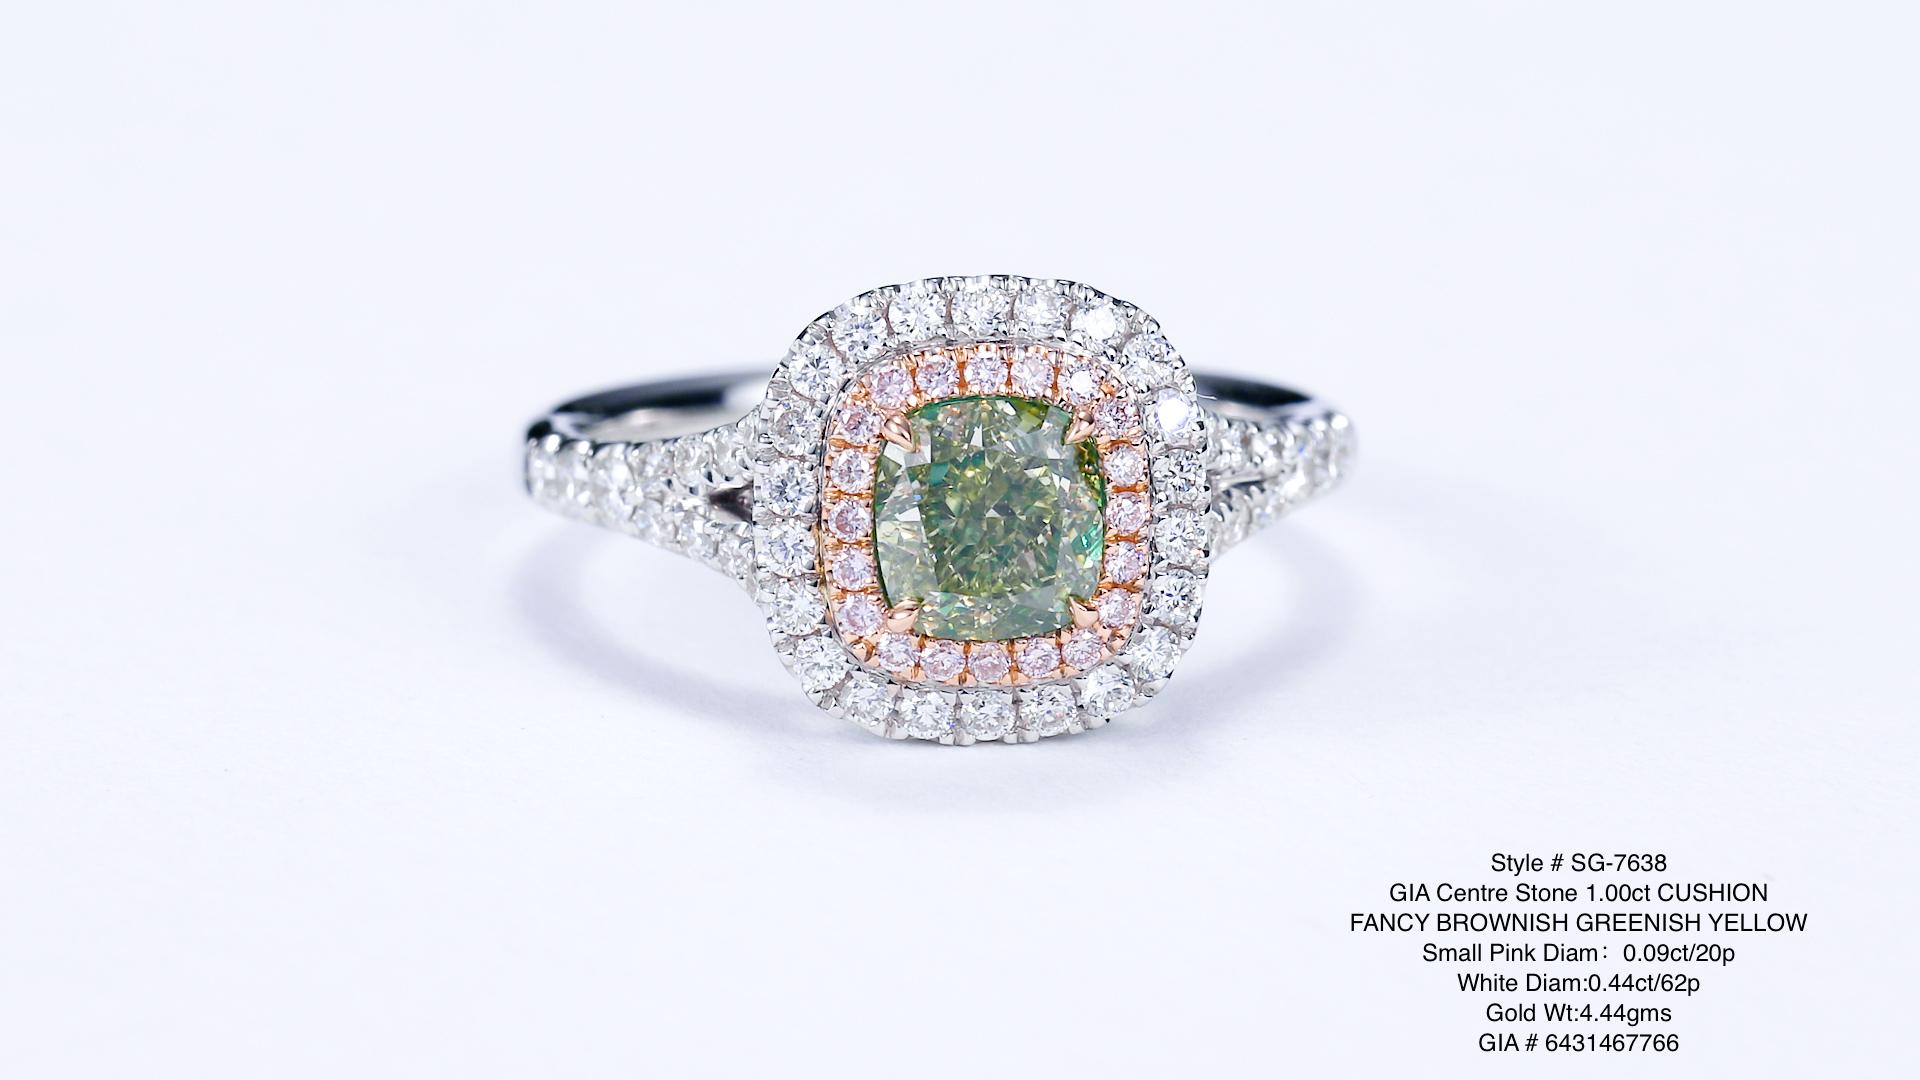 Indulge in the extraordinary allure of this breathtaking ring featuring a magnificent 1.00ct Fancy Brownish Greenish Yellow natural diamond. The cushion-shaped diamond boasts a mesmerising blend of earthy brown, green, and yellow tones, creating a